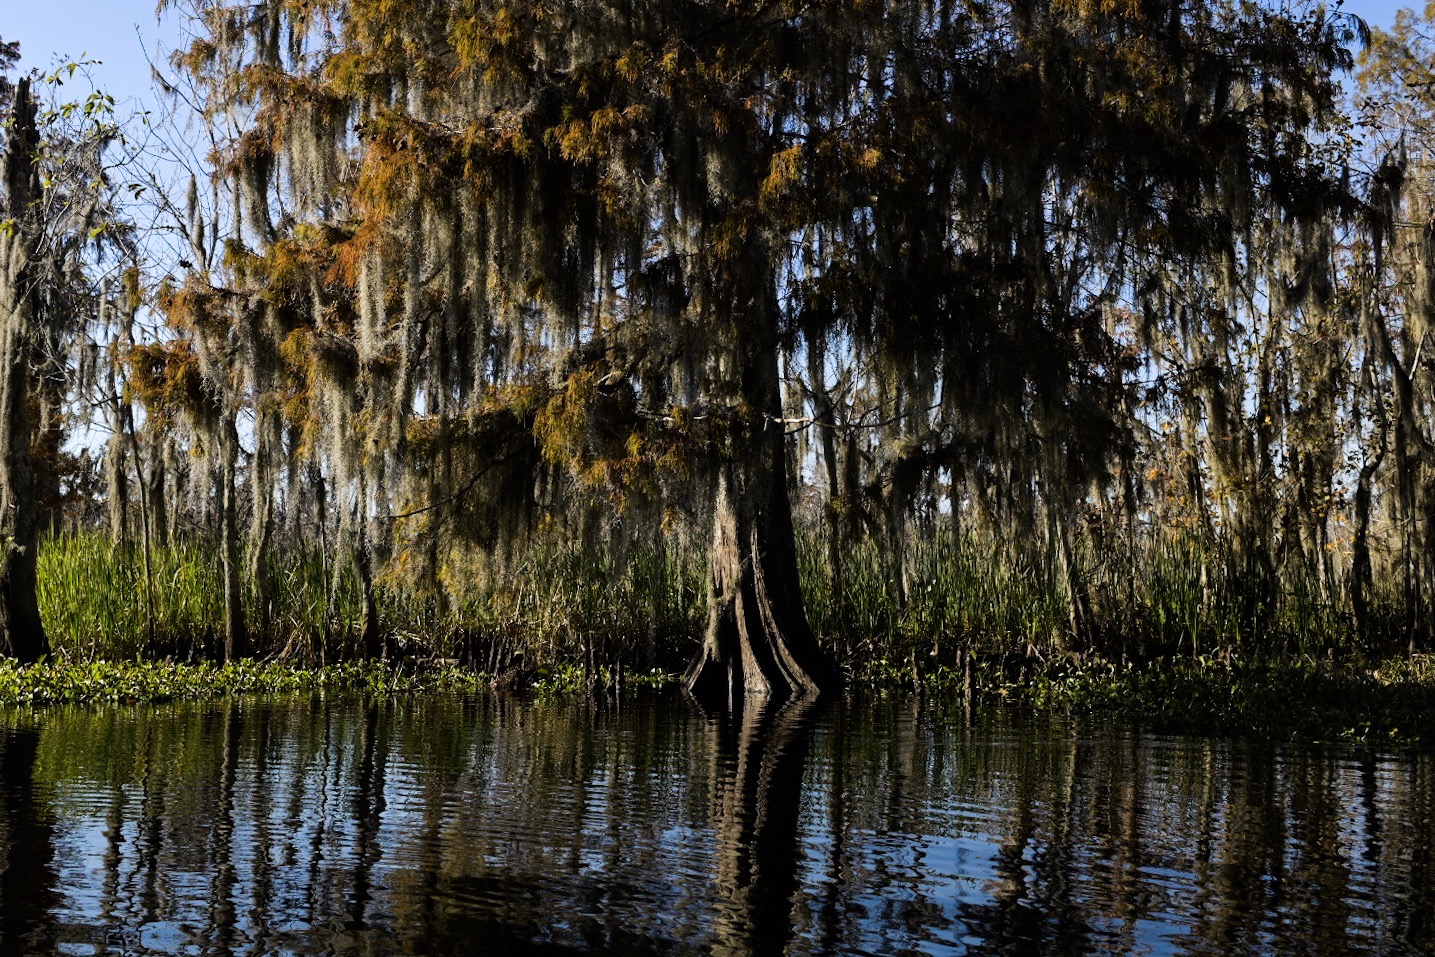 A cypress tree showing fall colors near Lake Poncartrain